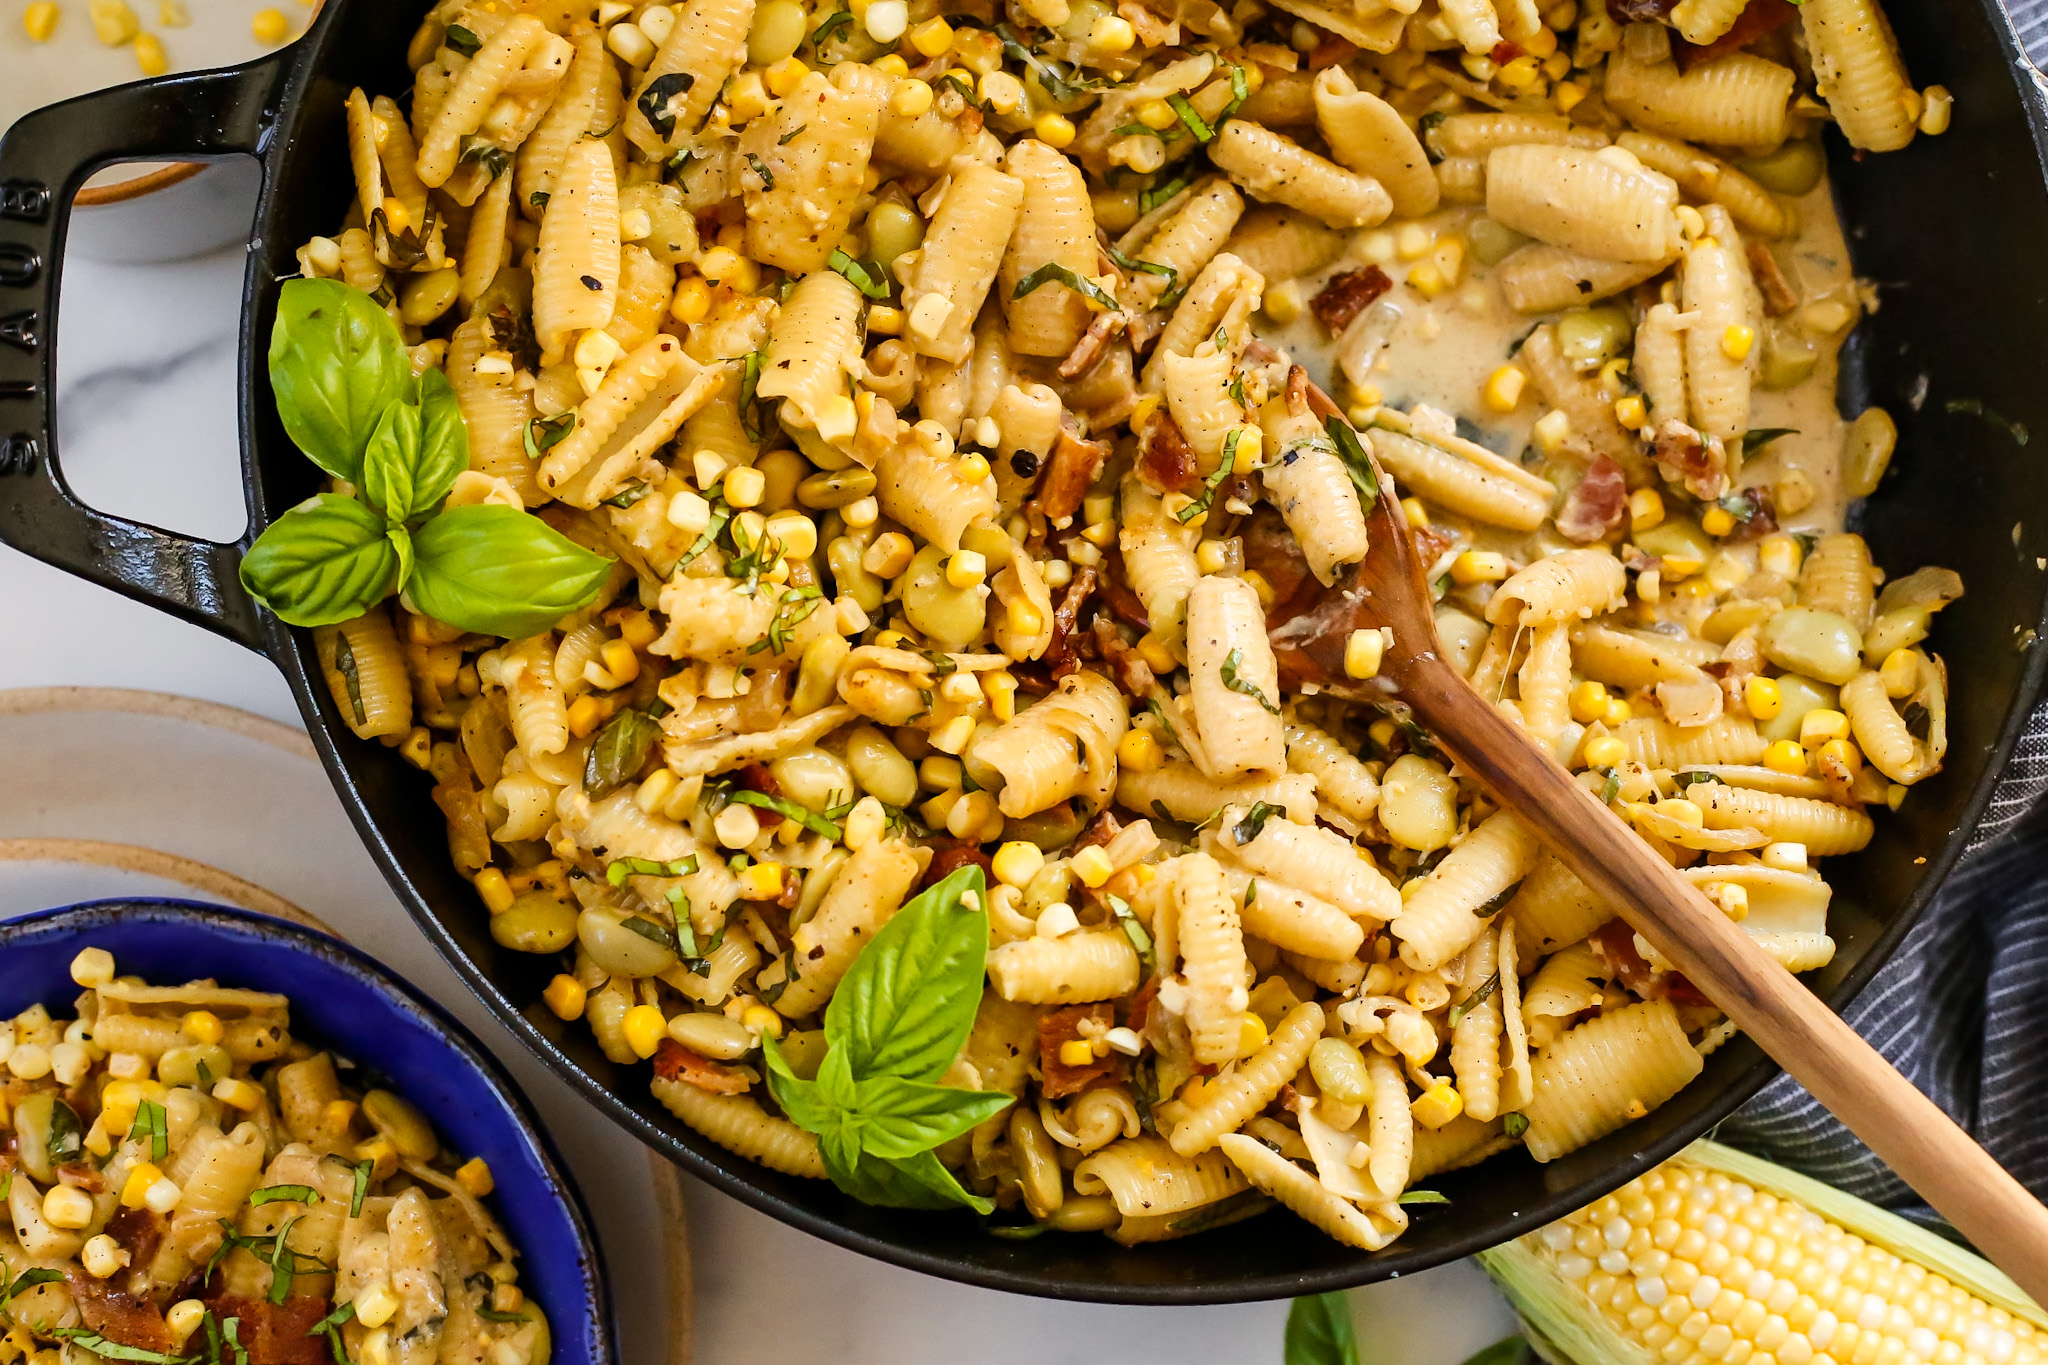 Overhead view of a large skillet containing a creamy corn pasta recipe with a small bowl served to the side, with both of them garnished with bacon crumbles, fresh basil, and cracked black pepper